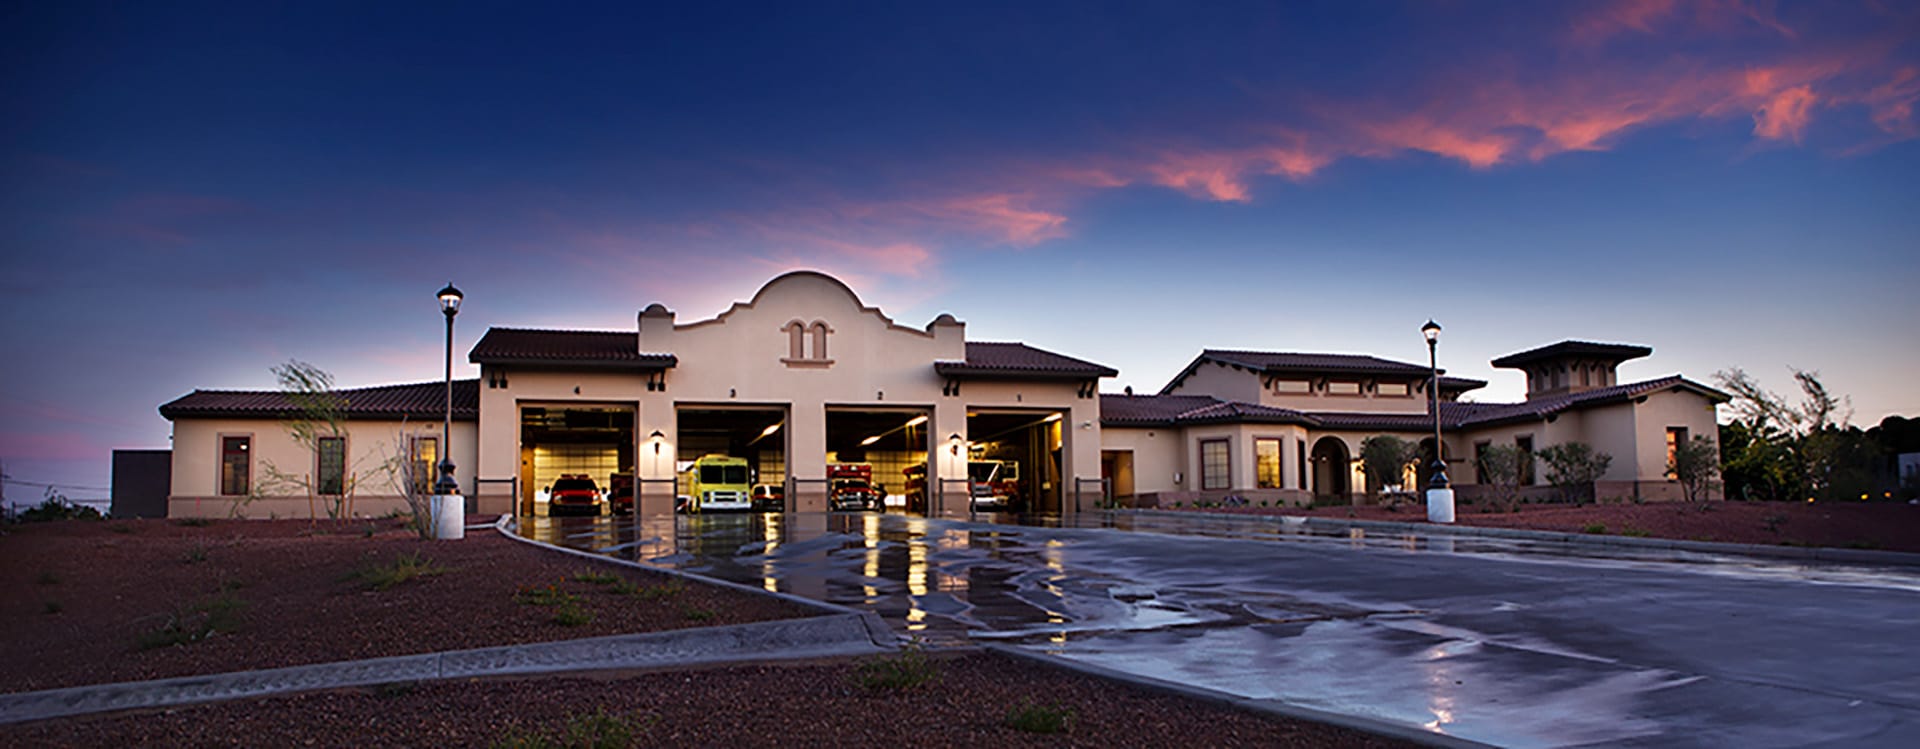 Firestation 1 in Yuma, AZ. - A project engineered by Core Engineering.